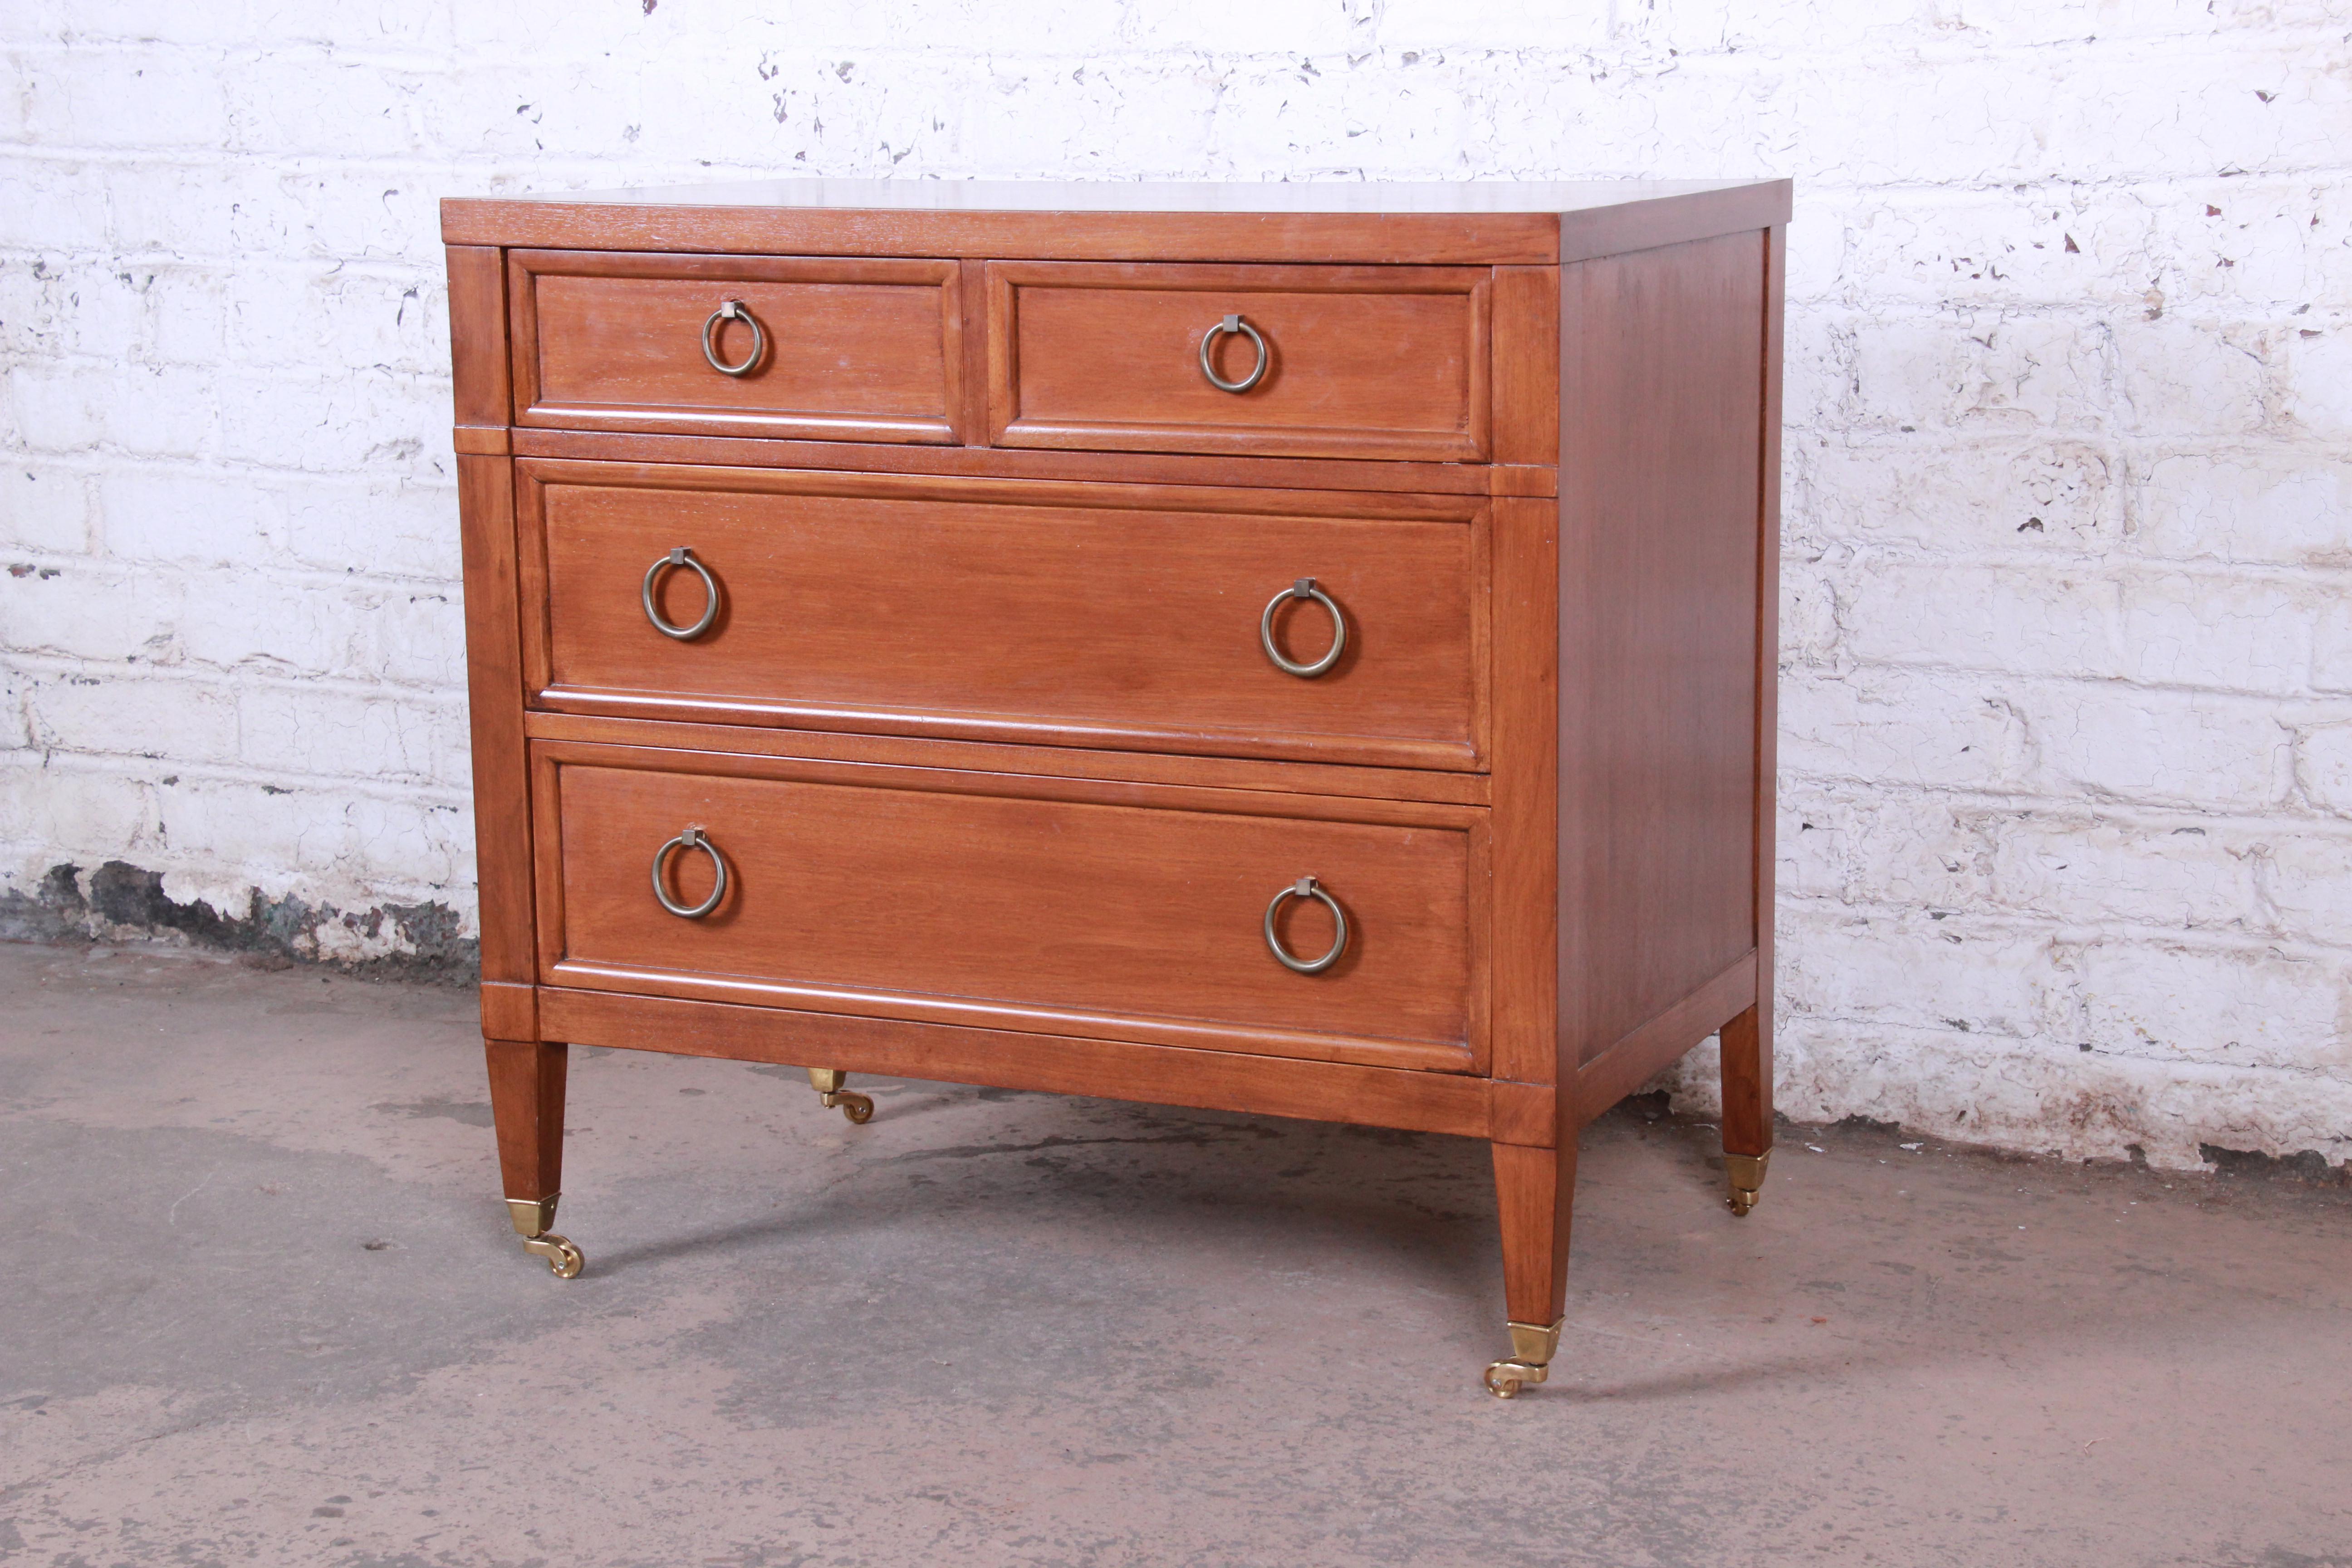 A gorgeous four-drawer midcentury bachelor chest dresser from the Milling Road line by Baker Furniture. The chest features beautiful wood grain and original brass ring drawer pulls, as well as original brass casters. It offers good storage, with